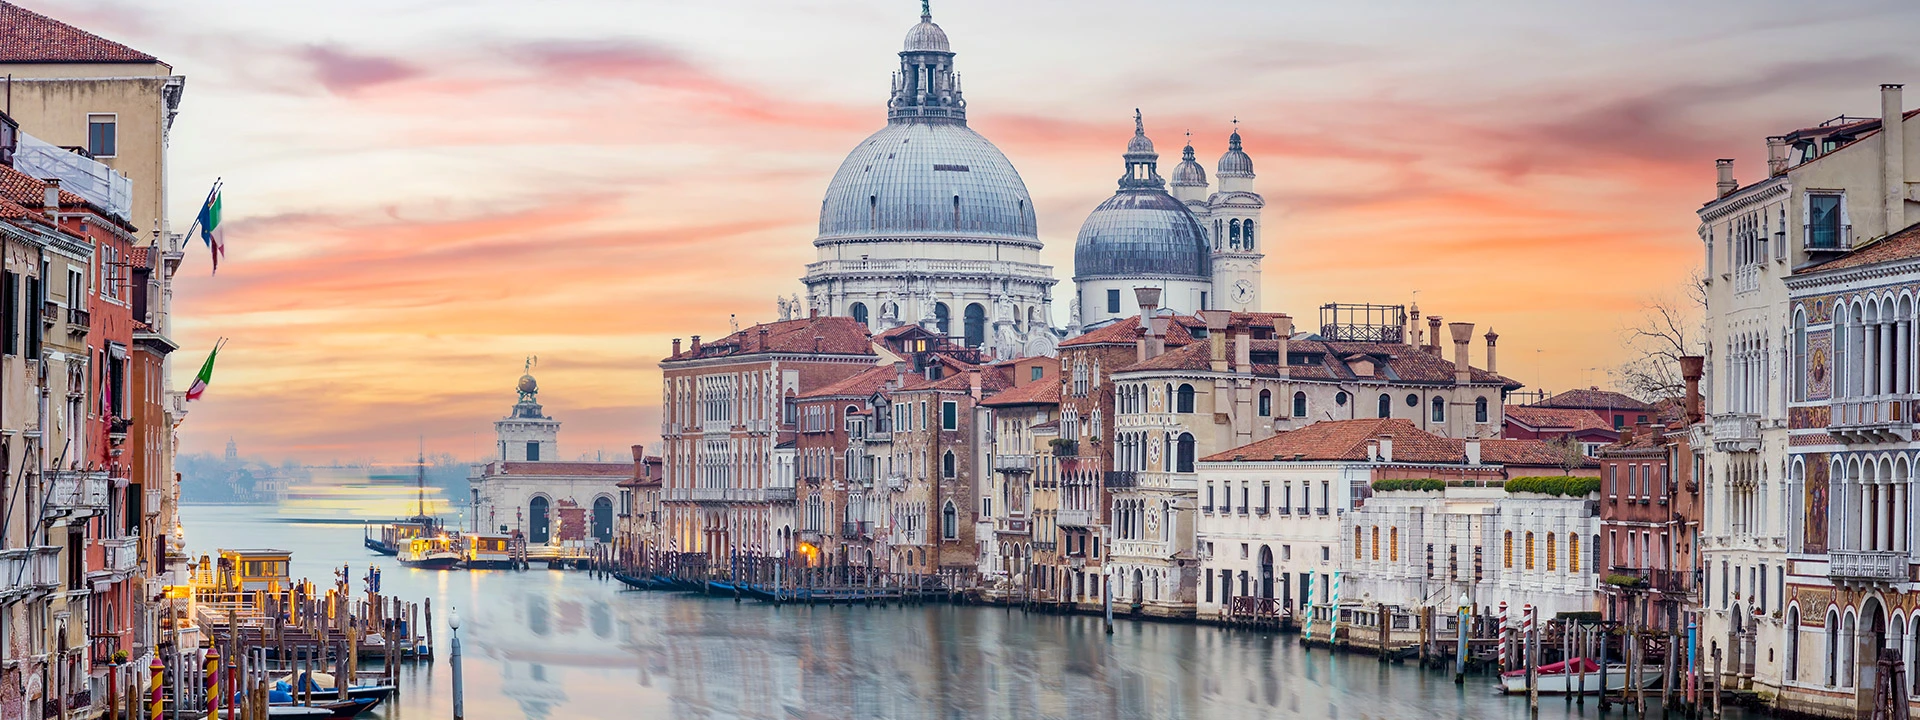 Cruise the The Grand Canal in Venice at sunset